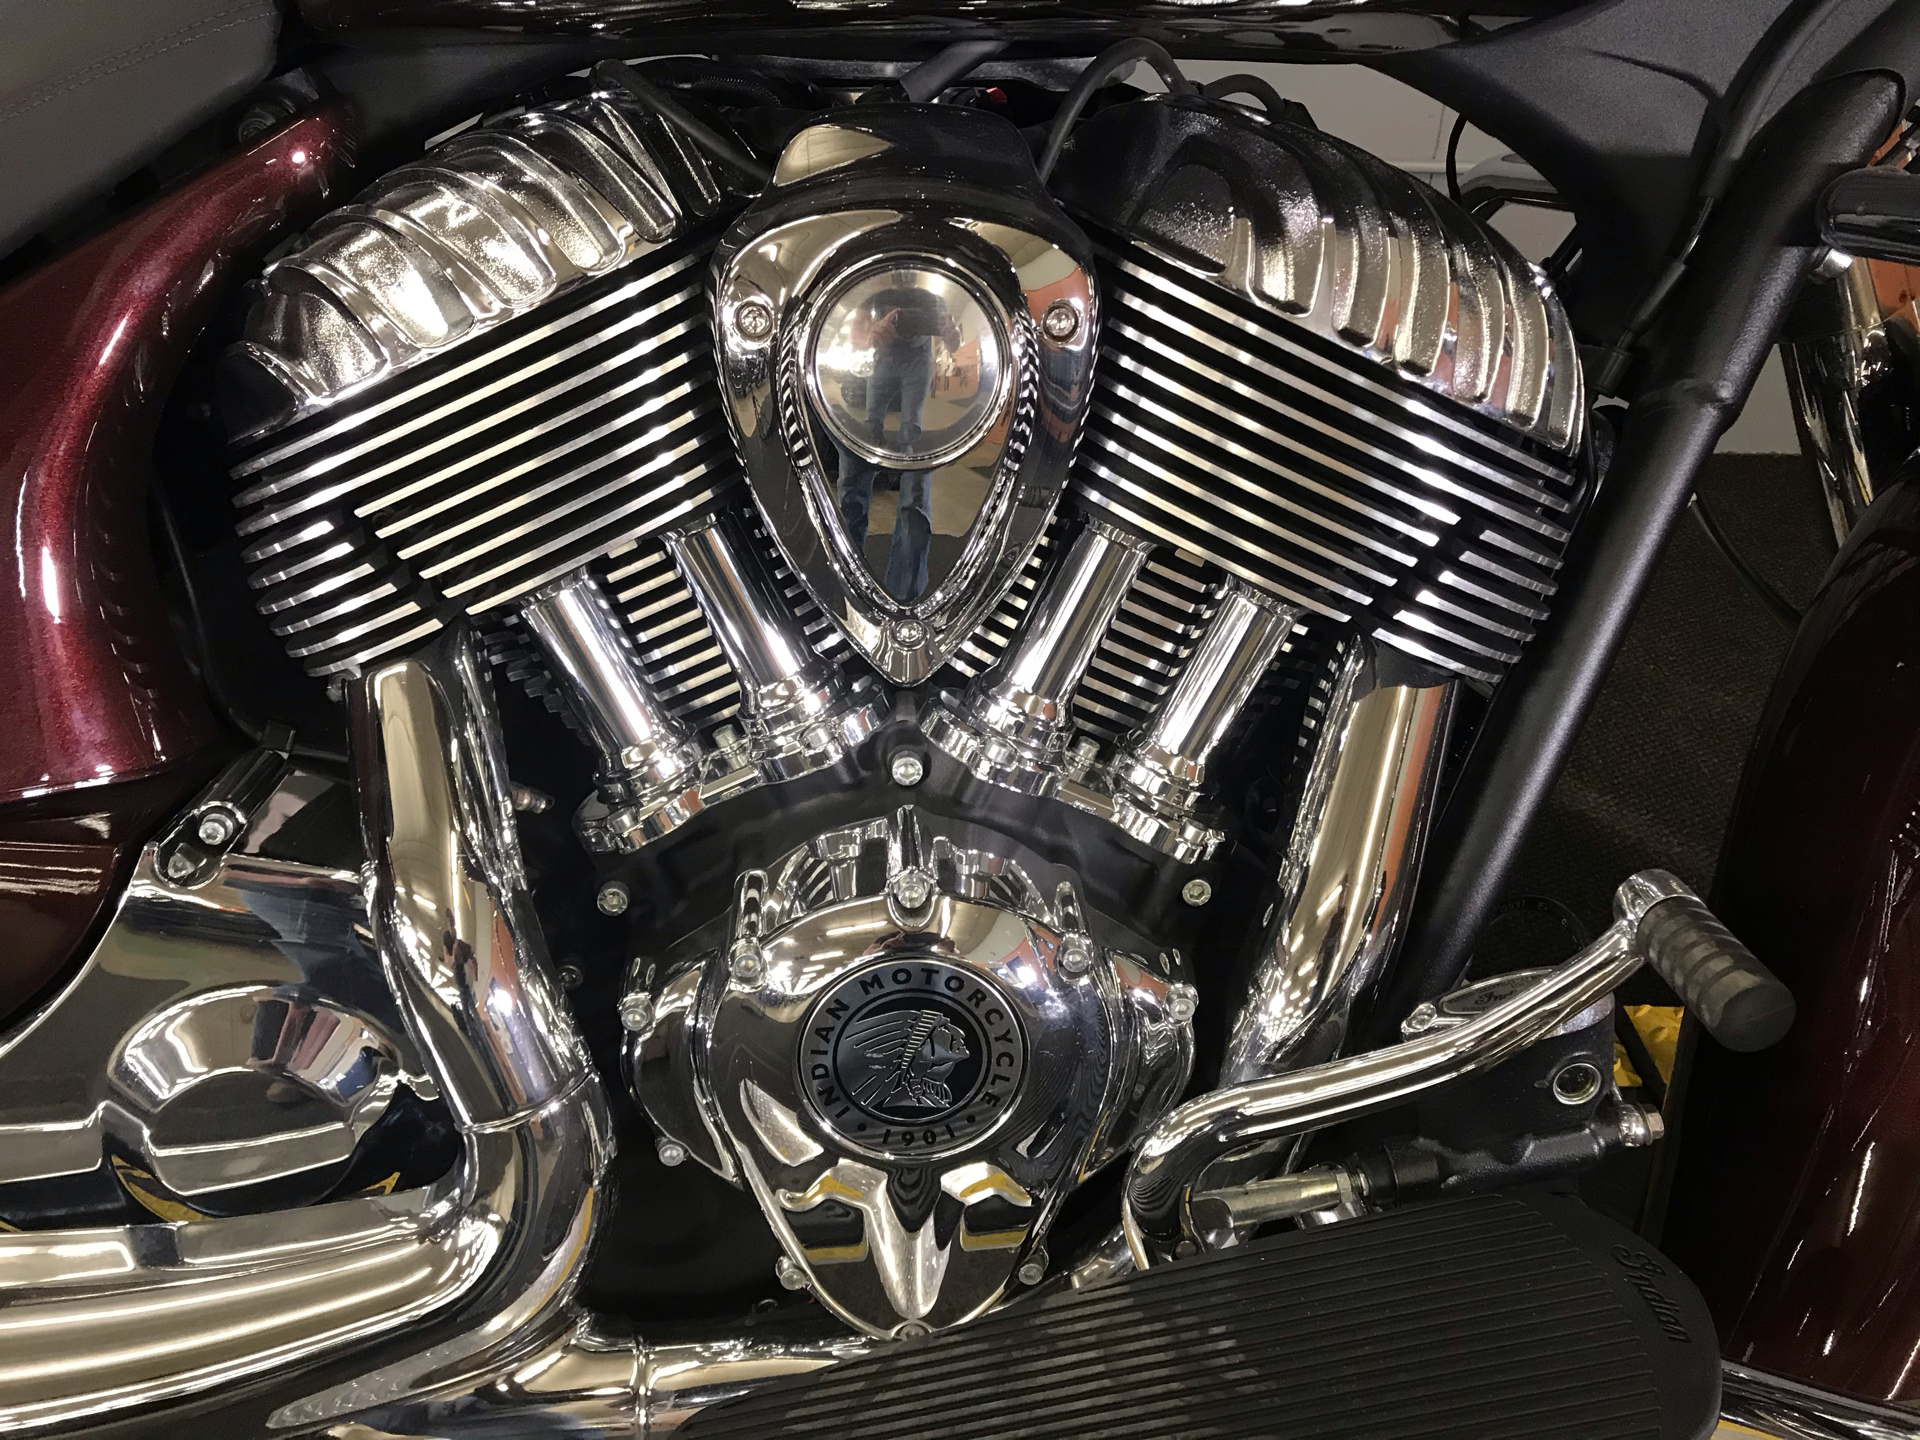 2019 Indian Chieftain® Limited ABS in Tyrone, Pennsylvania - Photo 3